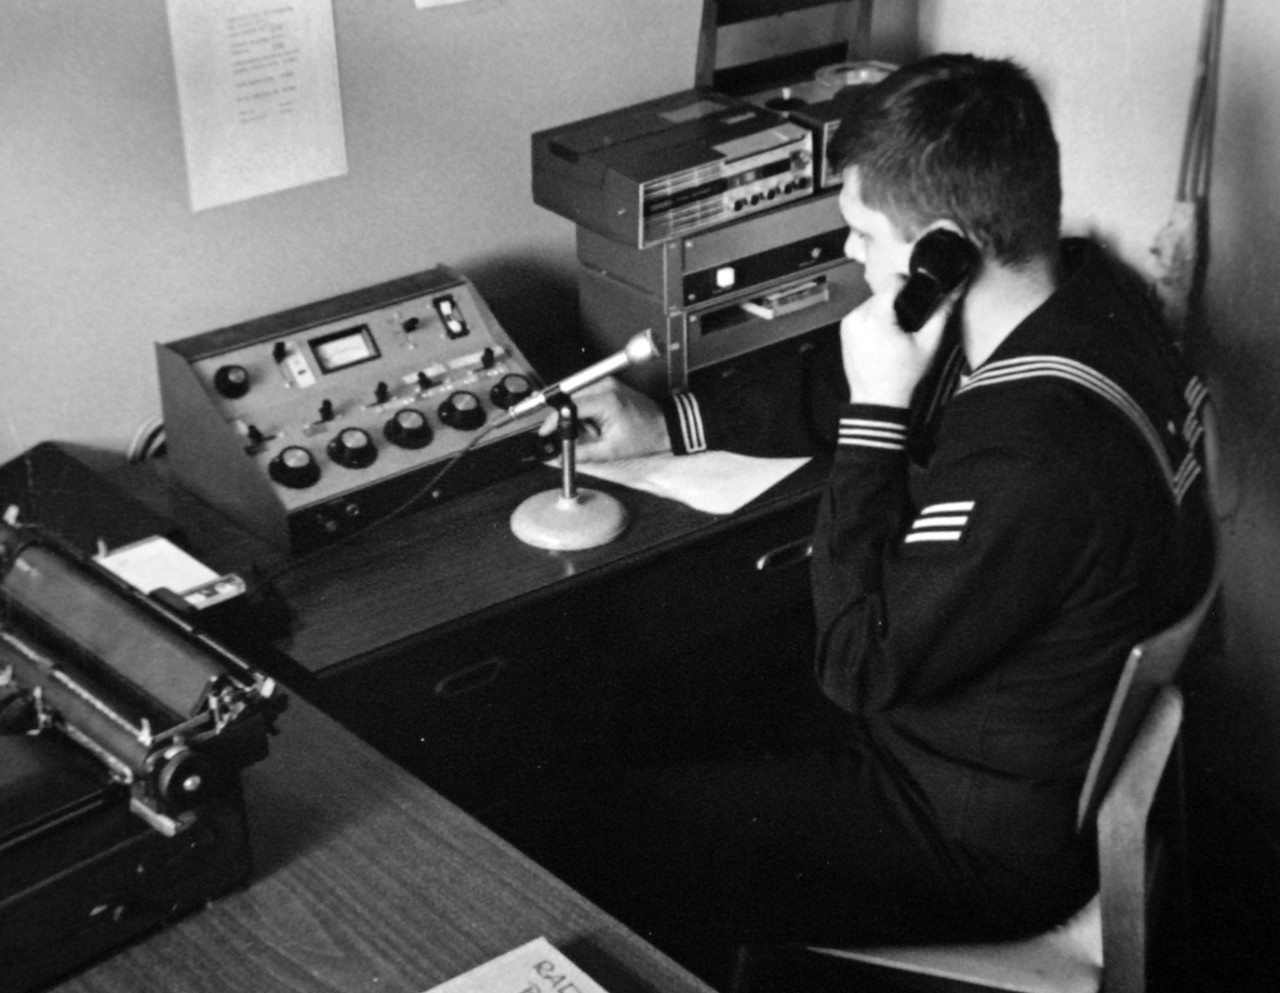 428-GX-USN-1140144:   U.S. Naval Station, San Diego, California, February 27, 1969.    A sailor at work in the command information bureau.  Information on the work of the Court of Inquiry on the capture of USS Pueblo (AGER-2) is being handled by the bureau.  Photographed by JOSN J.W. Fletcher, USN.   Official U.S. Navy Photograph, now in the collections of the National Archives (2017/05/23).  Photographed from reference card.  